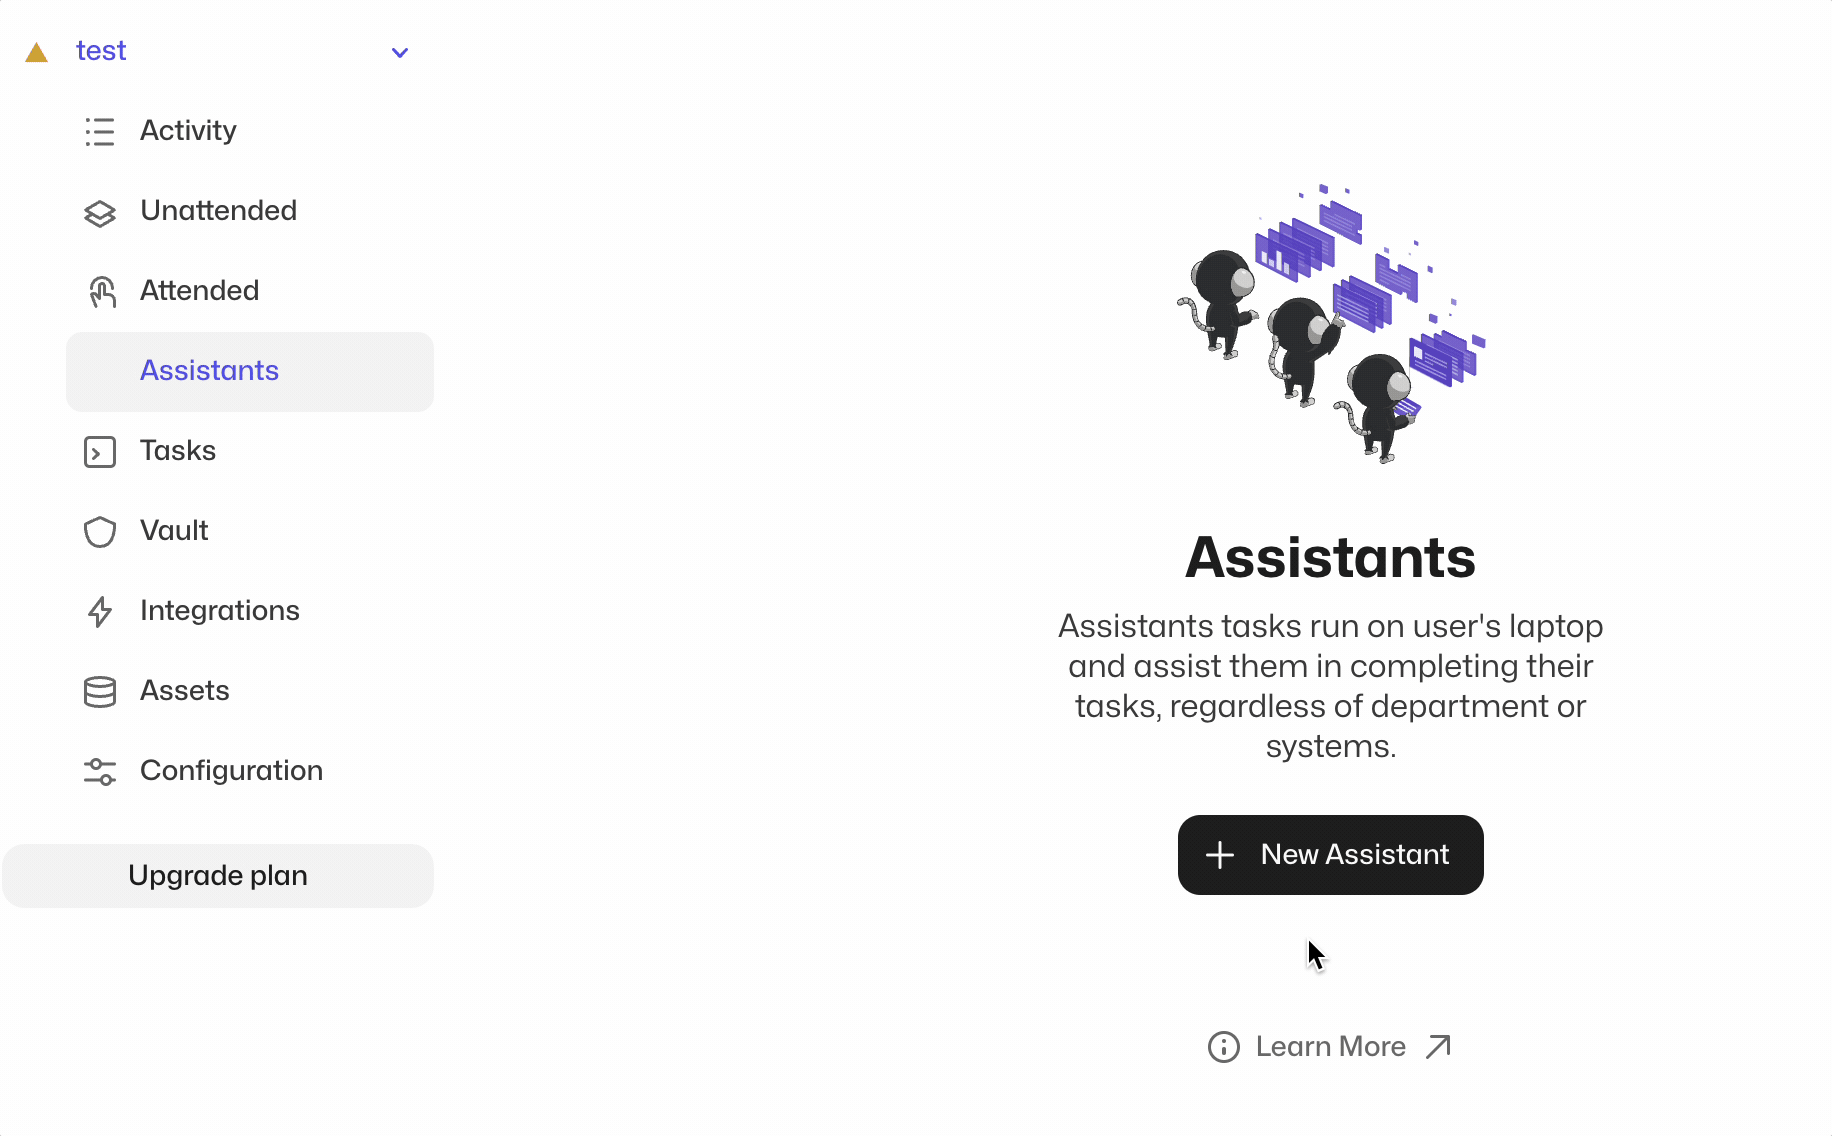 Add a new Assistant task